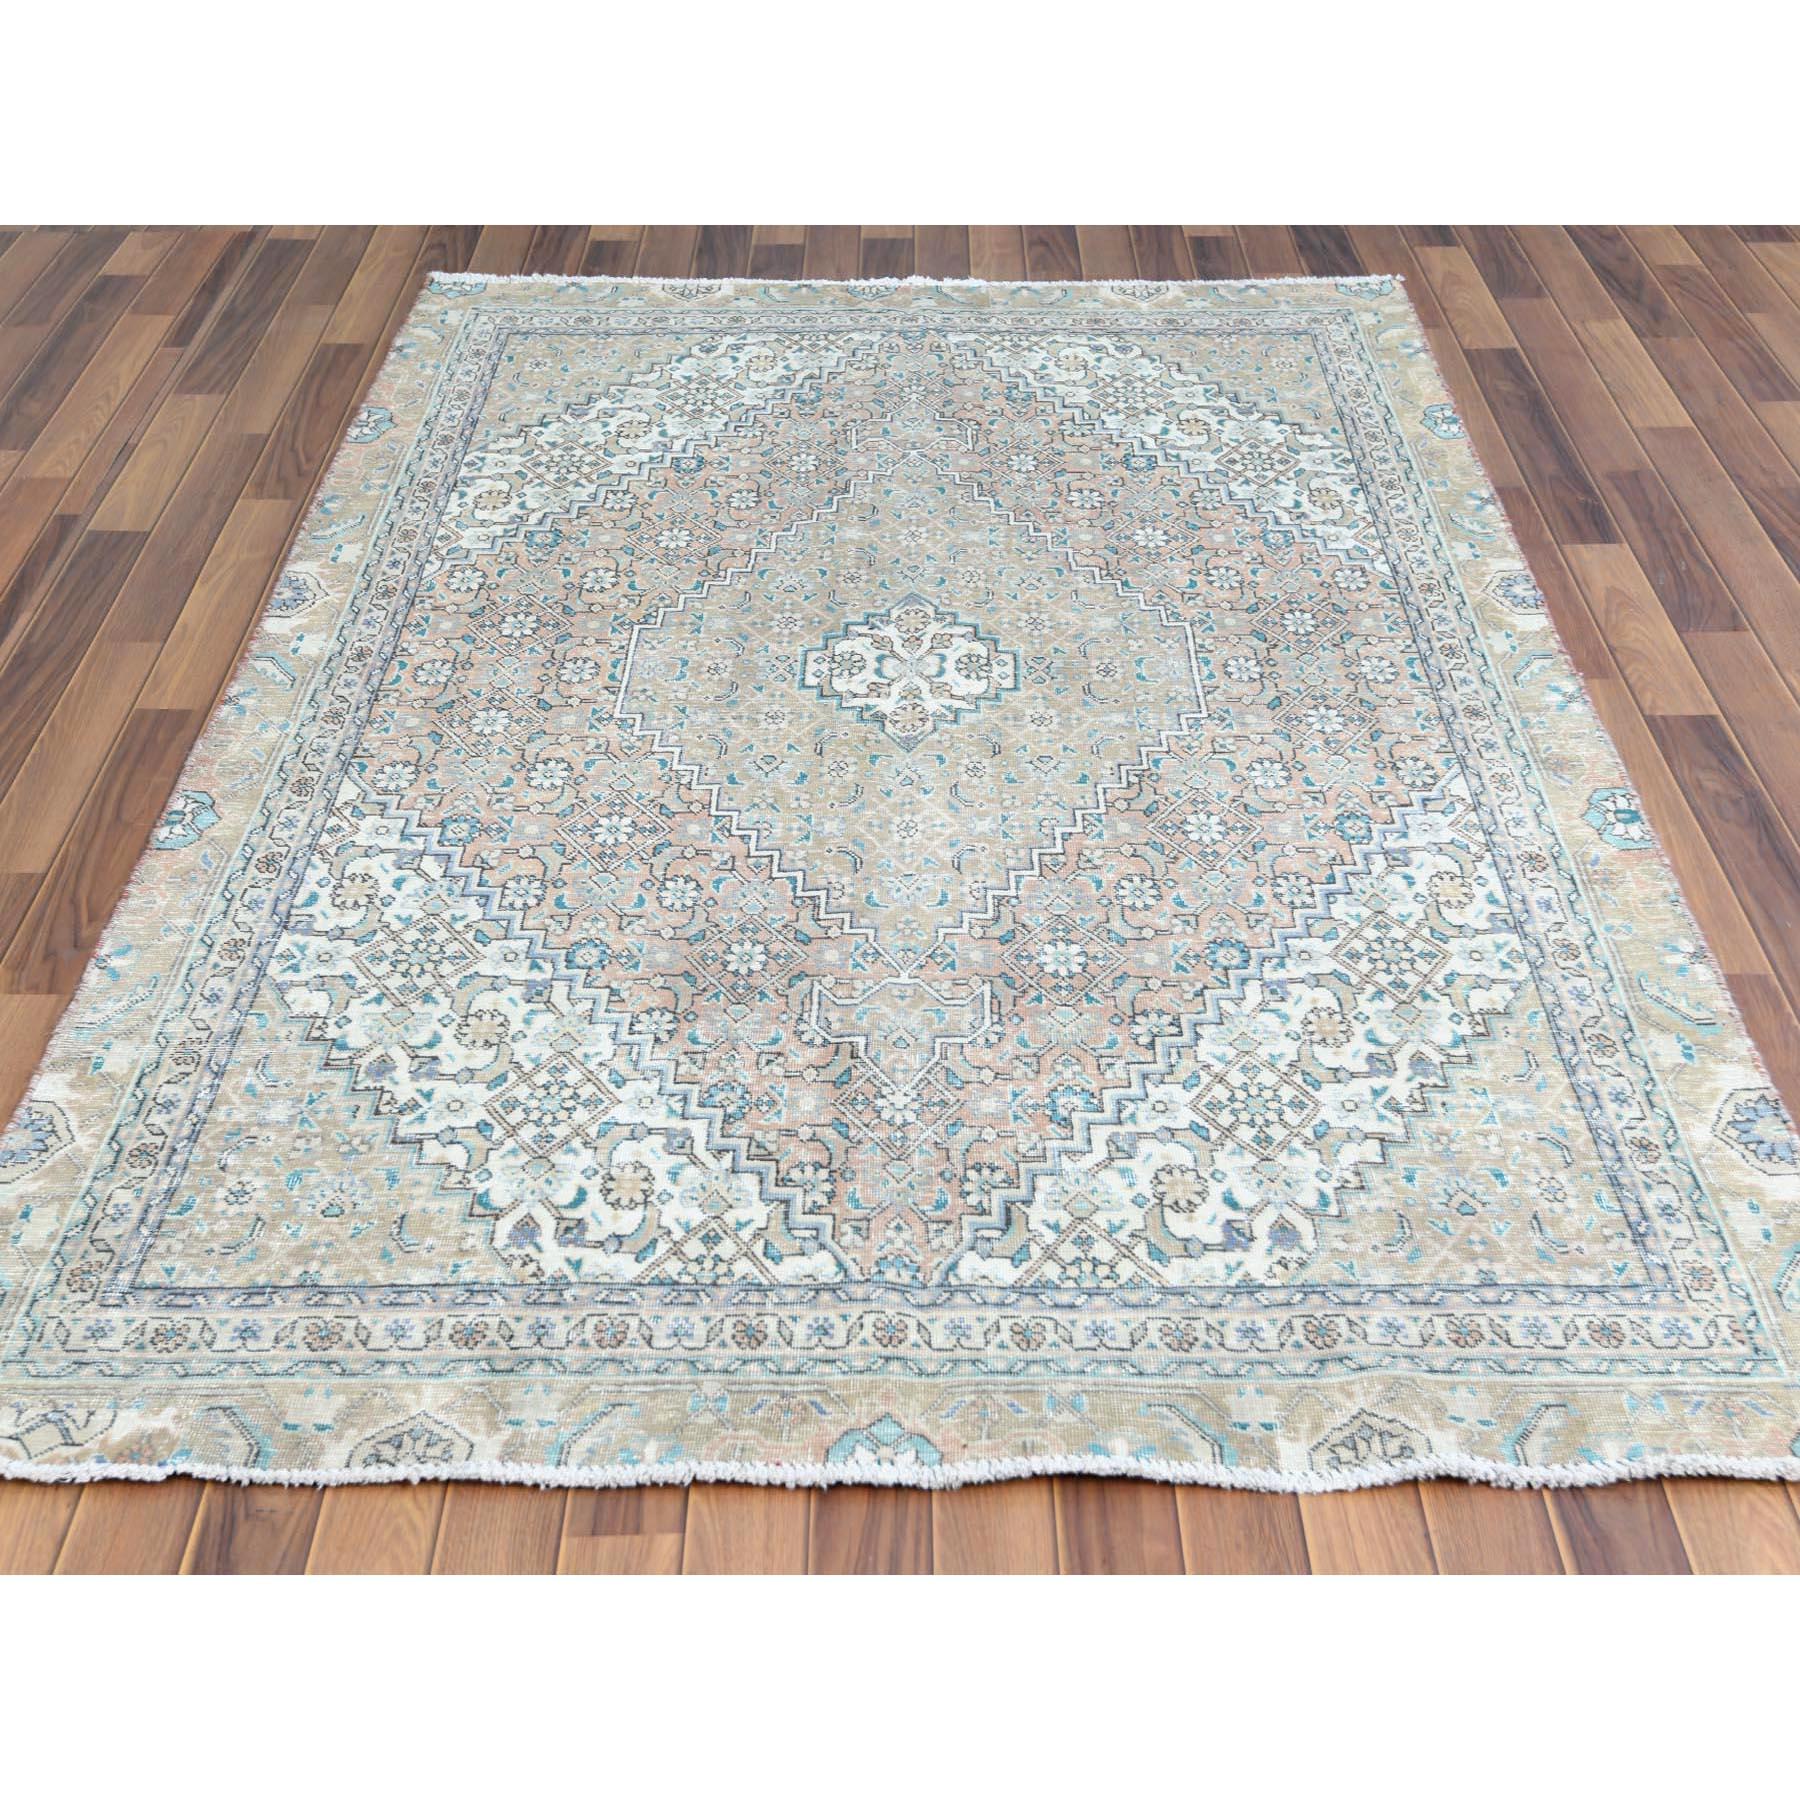 This fabulous hand Knotted carpet has been created and designed for extra strength and durability. This rug has been handcrafted for weeks in the traditional method that is used to make Rugs. This is truly a one-of-kind piece. 

Exact rug size in